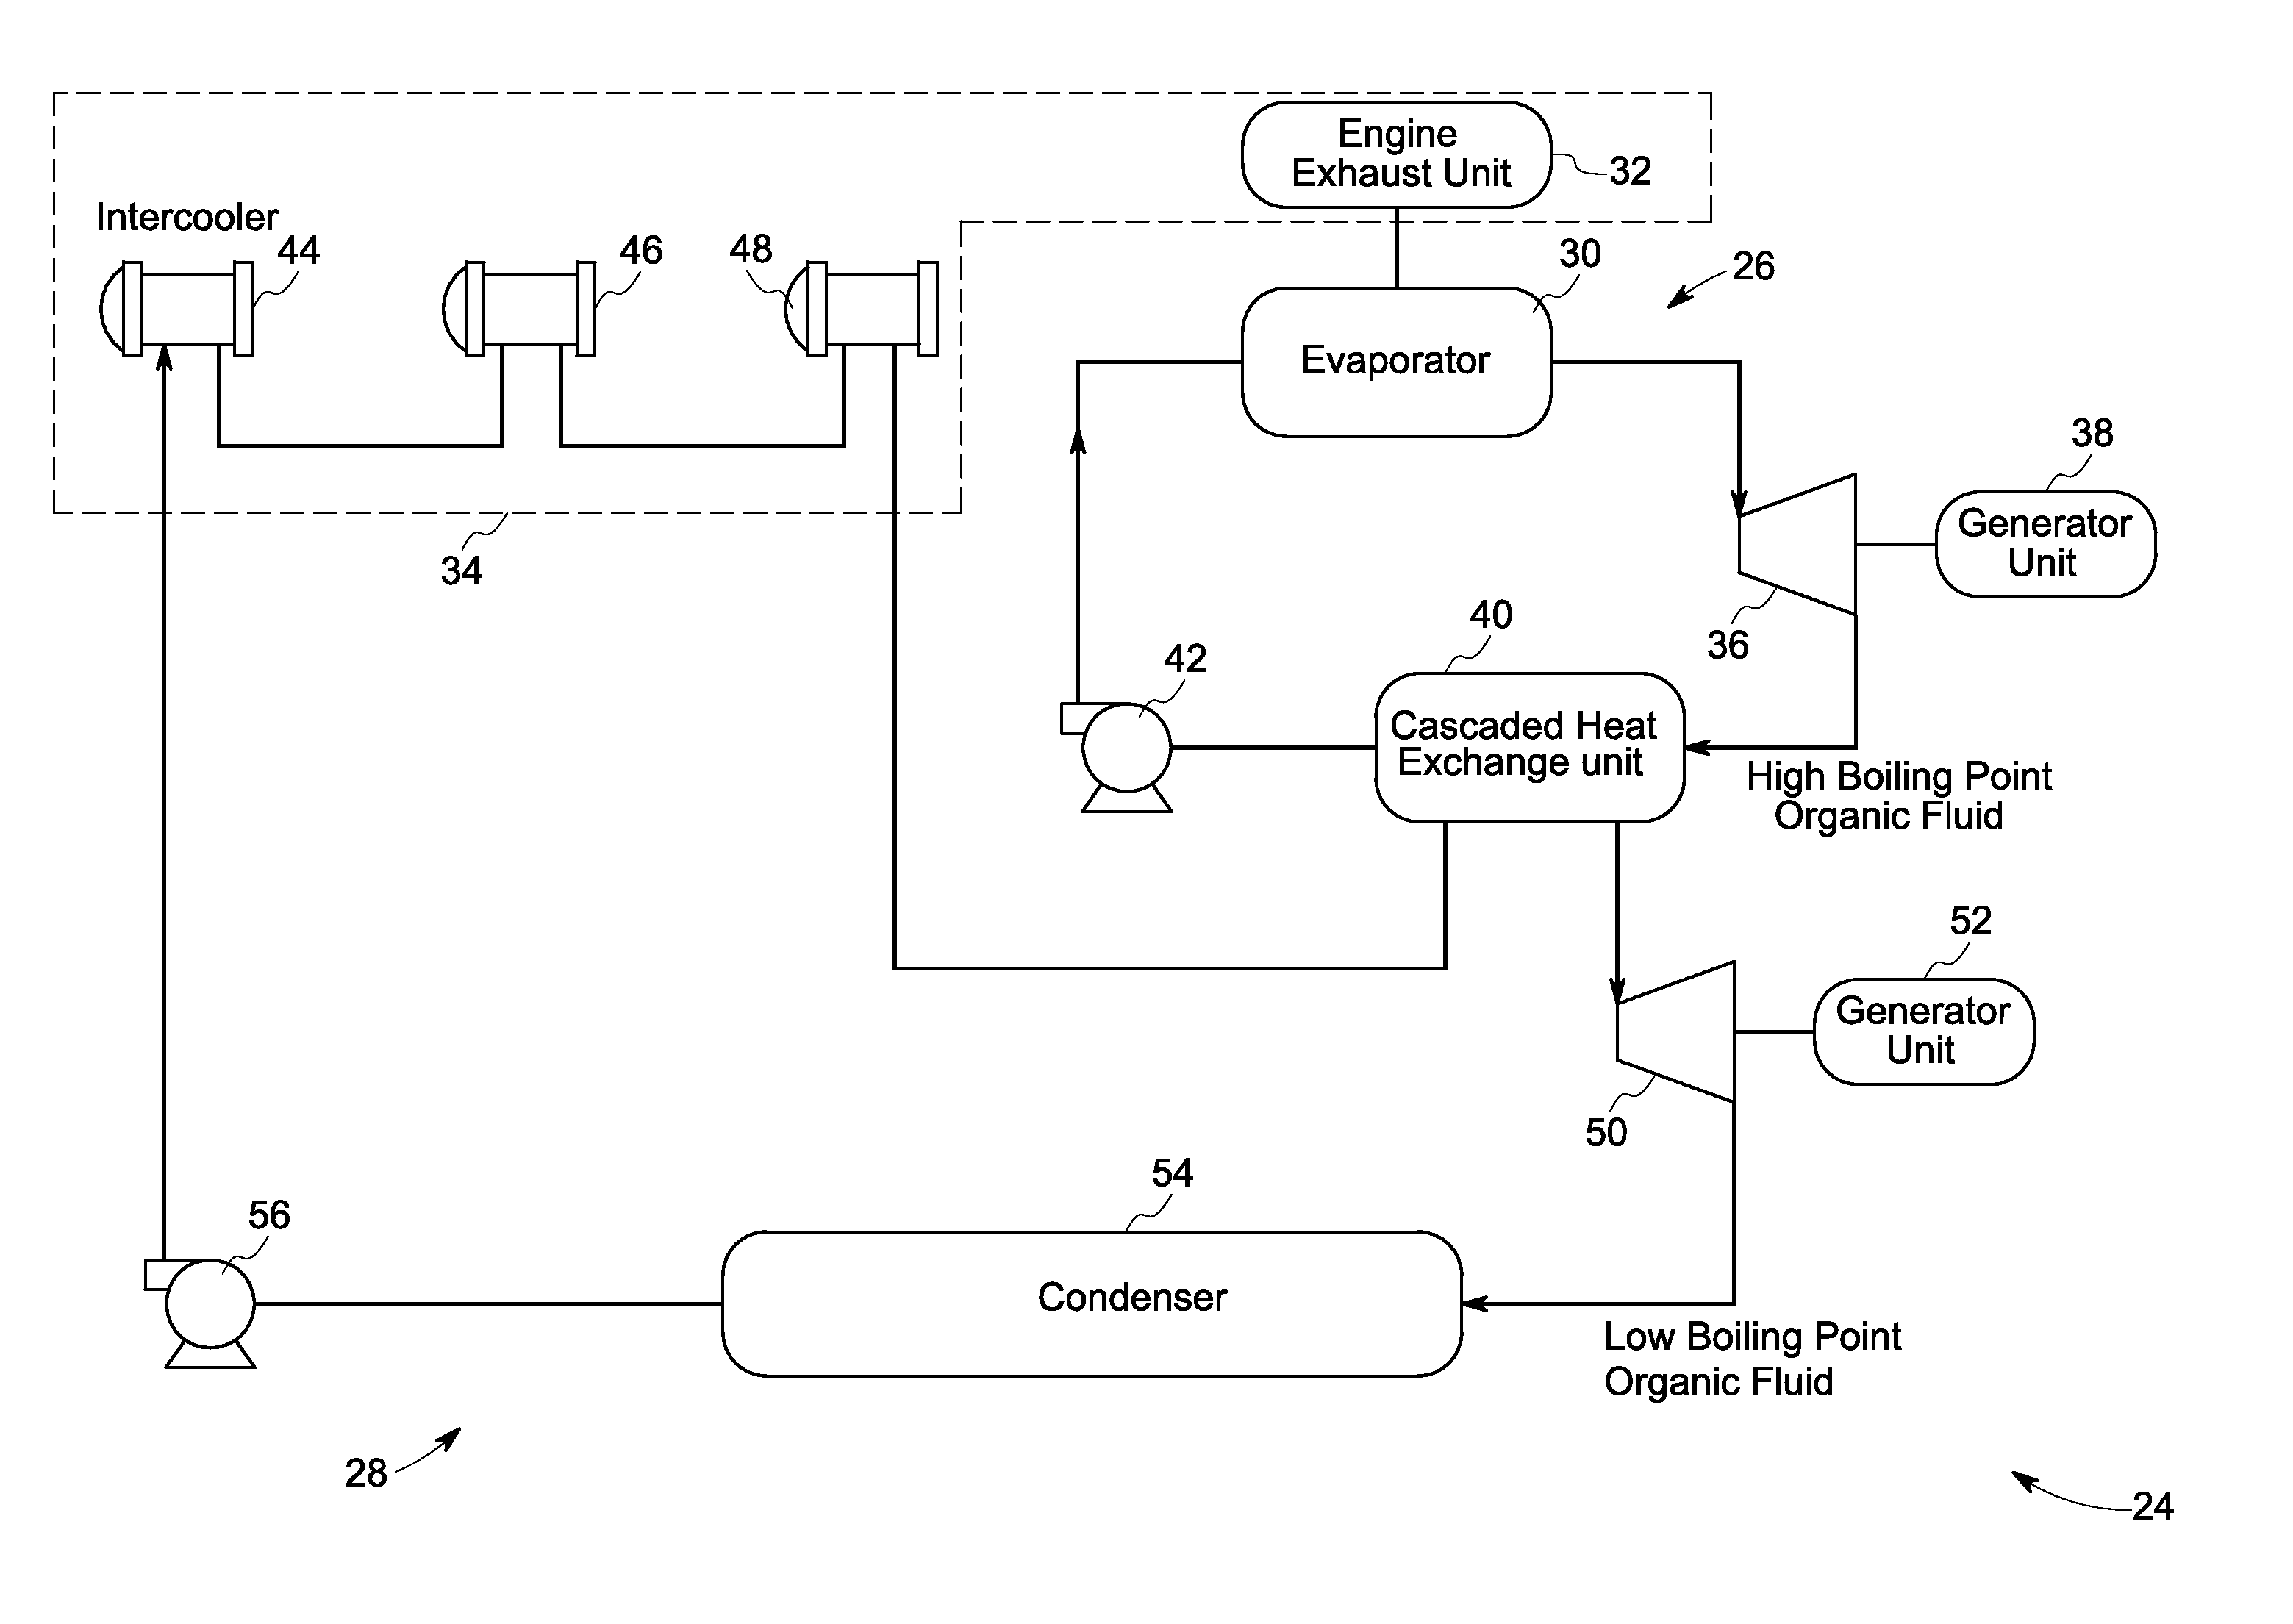 Rankine cycle system